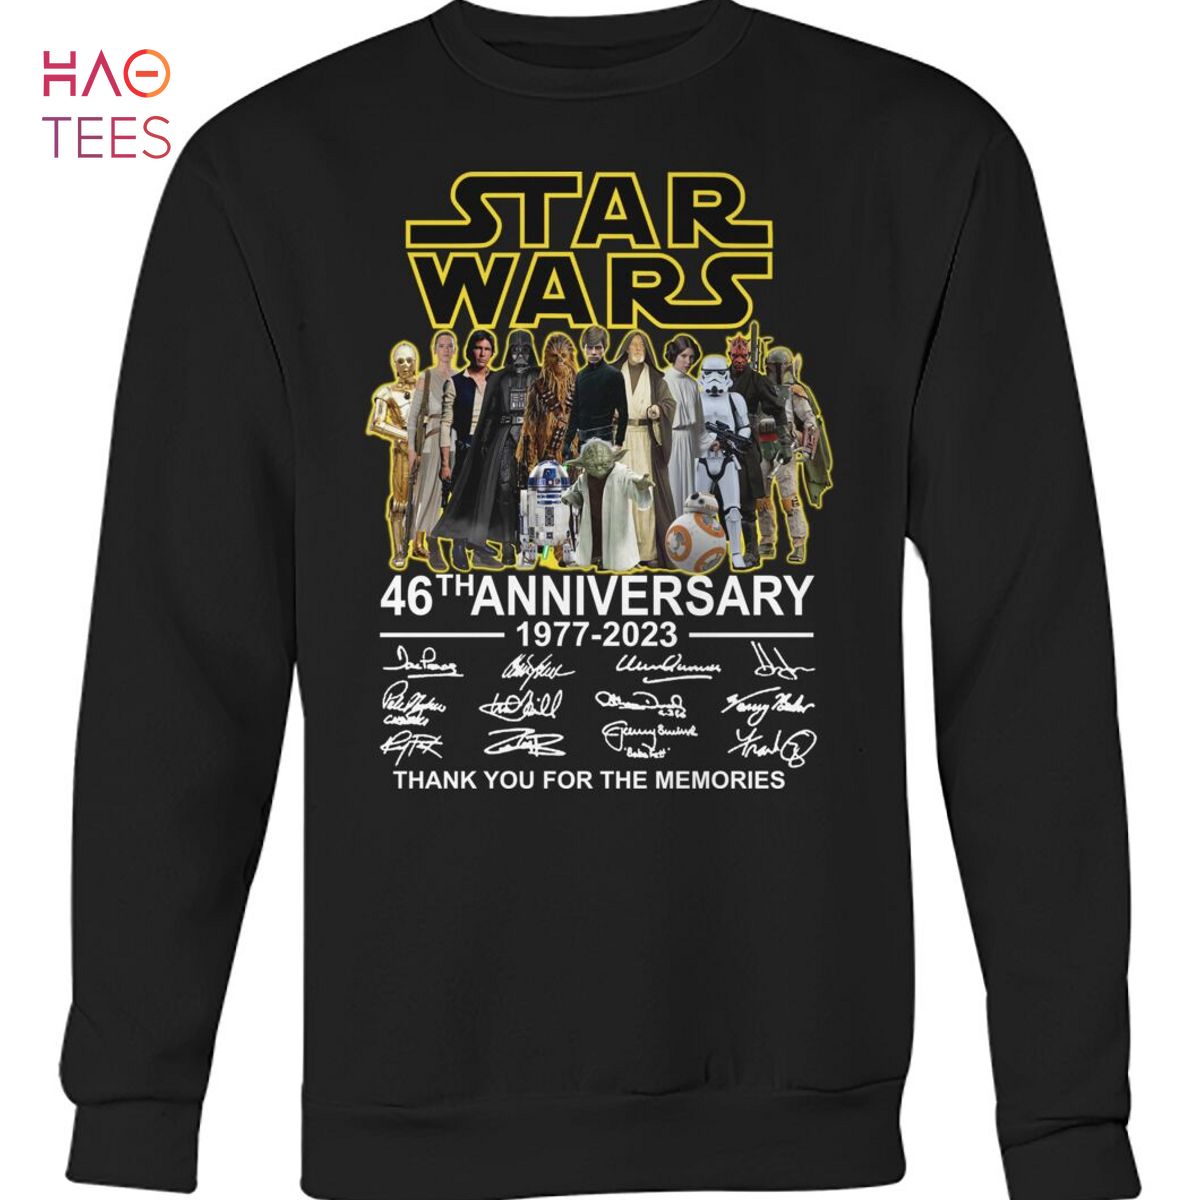 https://images.haotees.com/wp-content/uploads/2023/02/16035740/star-wars-46-anniversary-1977-2023-thank-you-for-the-memories-t-shirt-3-RKcW6.jpg